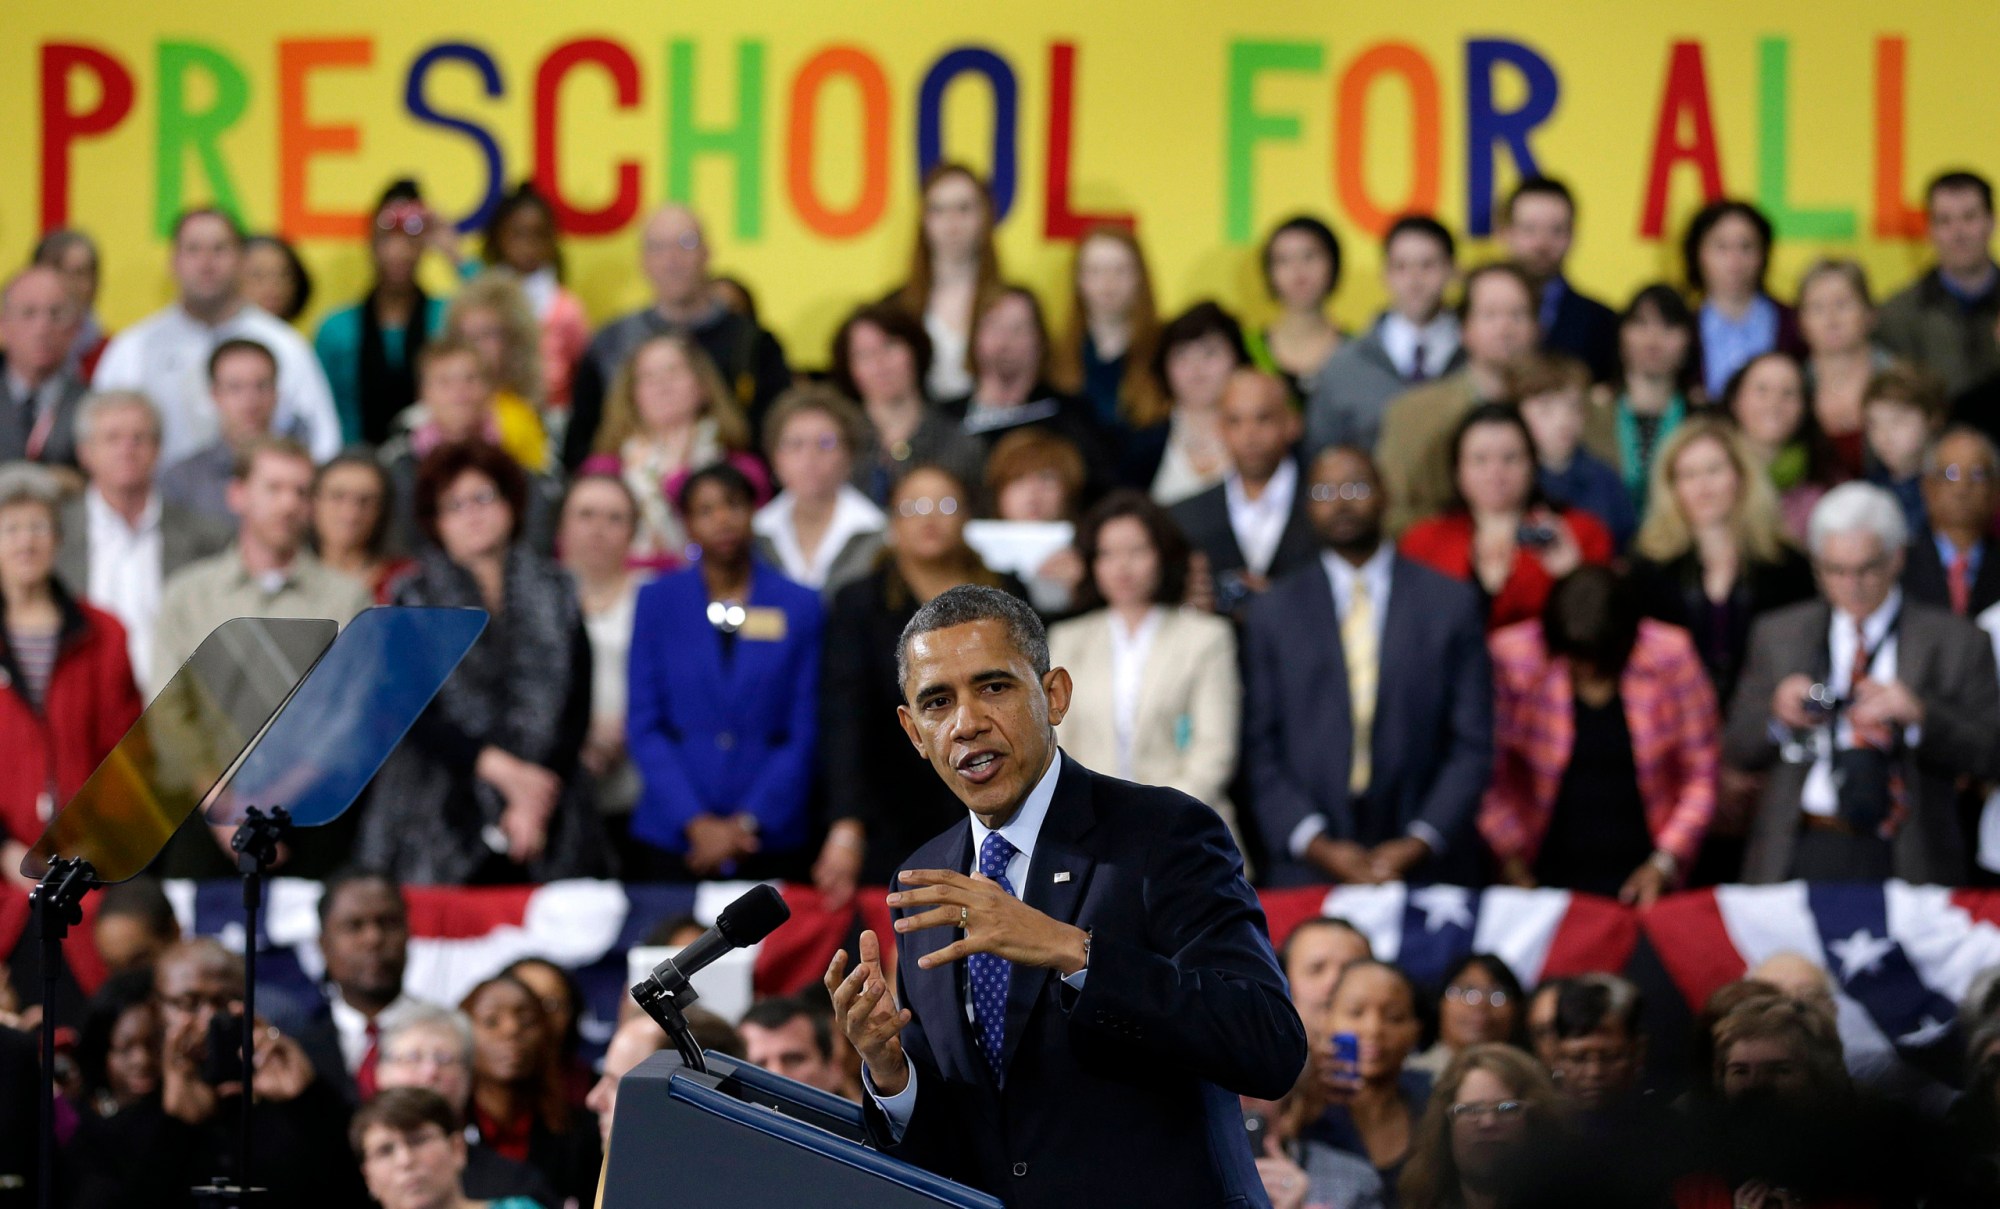 President Barack Obama speaks about early childhood education in Decatur, Georgia. (AP/ John Bazemore)